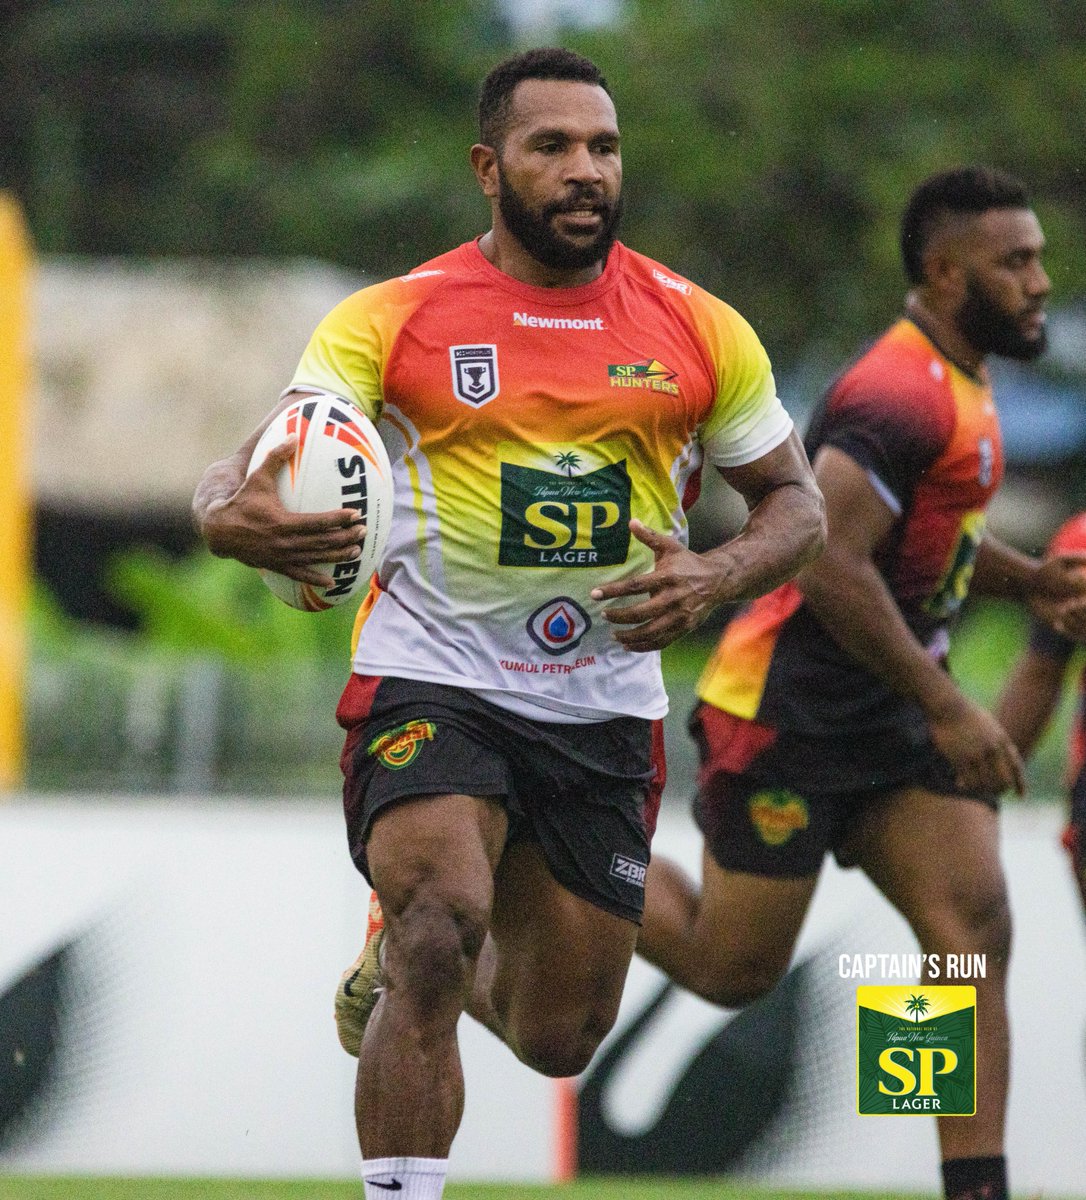 Captain's run 09.05.2024 ✅🏹🫡🏉🇵🇬🇵🇬

Get your tickets here 👉 tix.tiketmastas.com.pg/Events/SP-PNG-…

#jointhetribe #jointhehunt